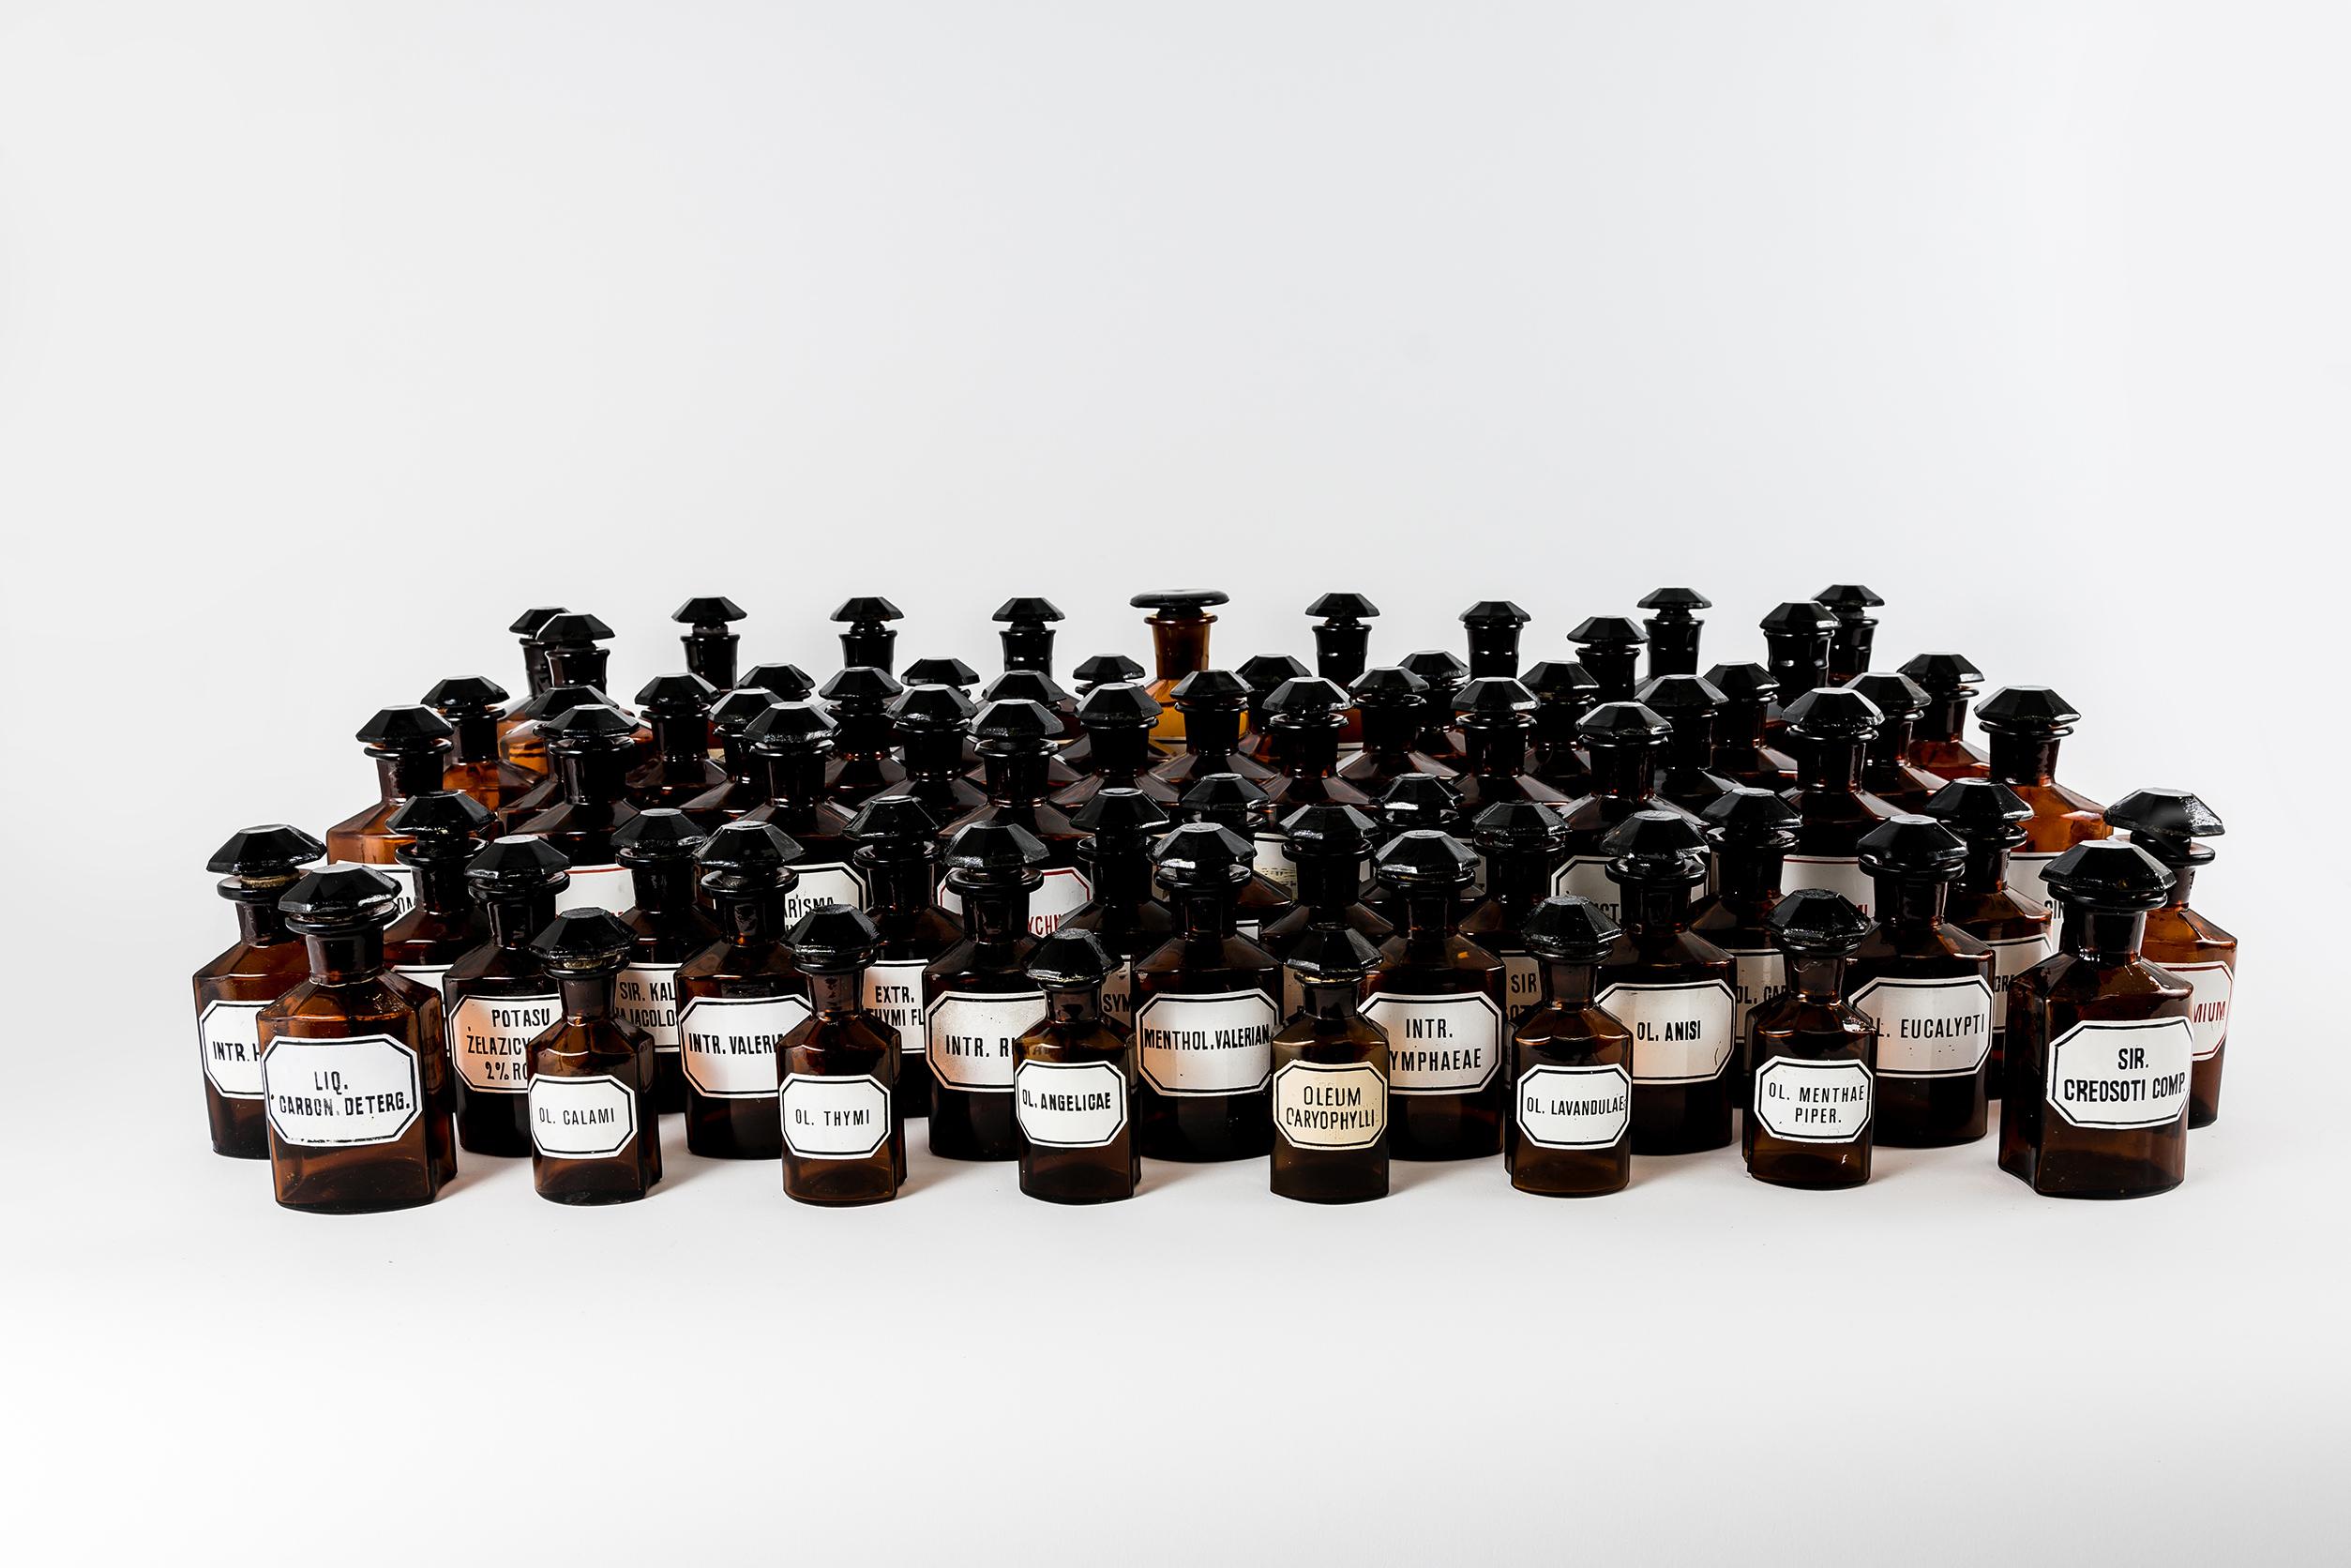 Set of 67 Pharmacy Bottles Amber Glass.
The set:
19cm x 12pcs
16cm x 29pcs
13cm x 21pcs
10cm x 5pcs
All bottles with a solid glass' stoppers.
Bottles have black or red labels or handwritten inscriptions.